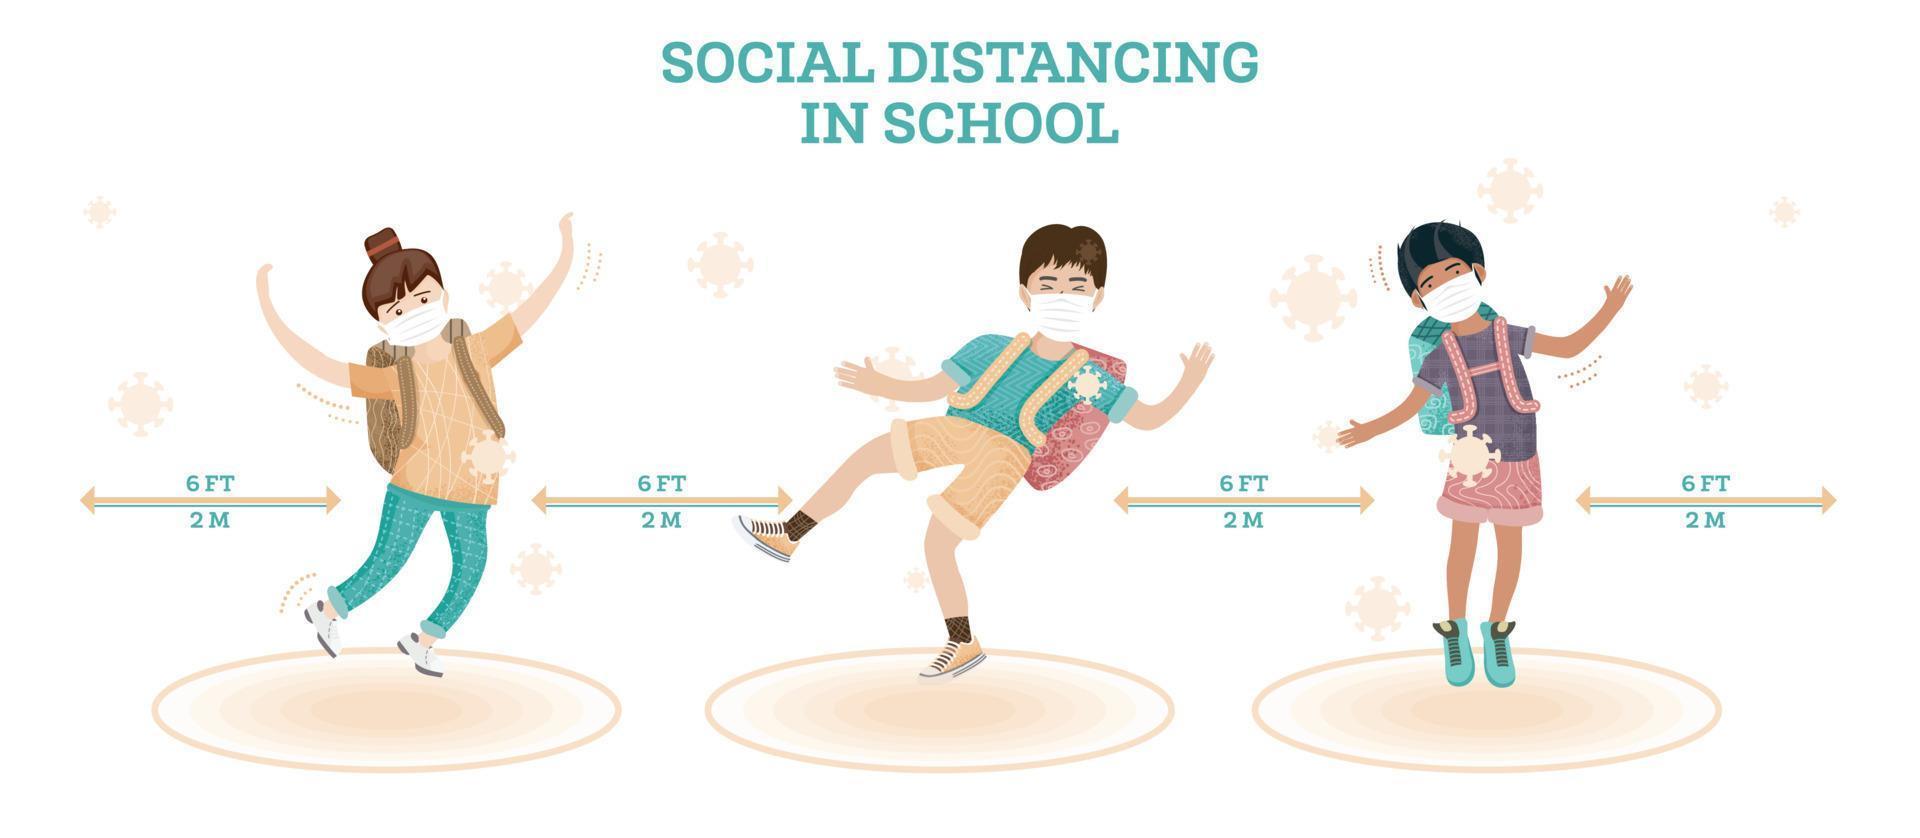 Boys and Girl are Playing Together and Jumping Up. New Normal at School. Social Distancing Concept. vector